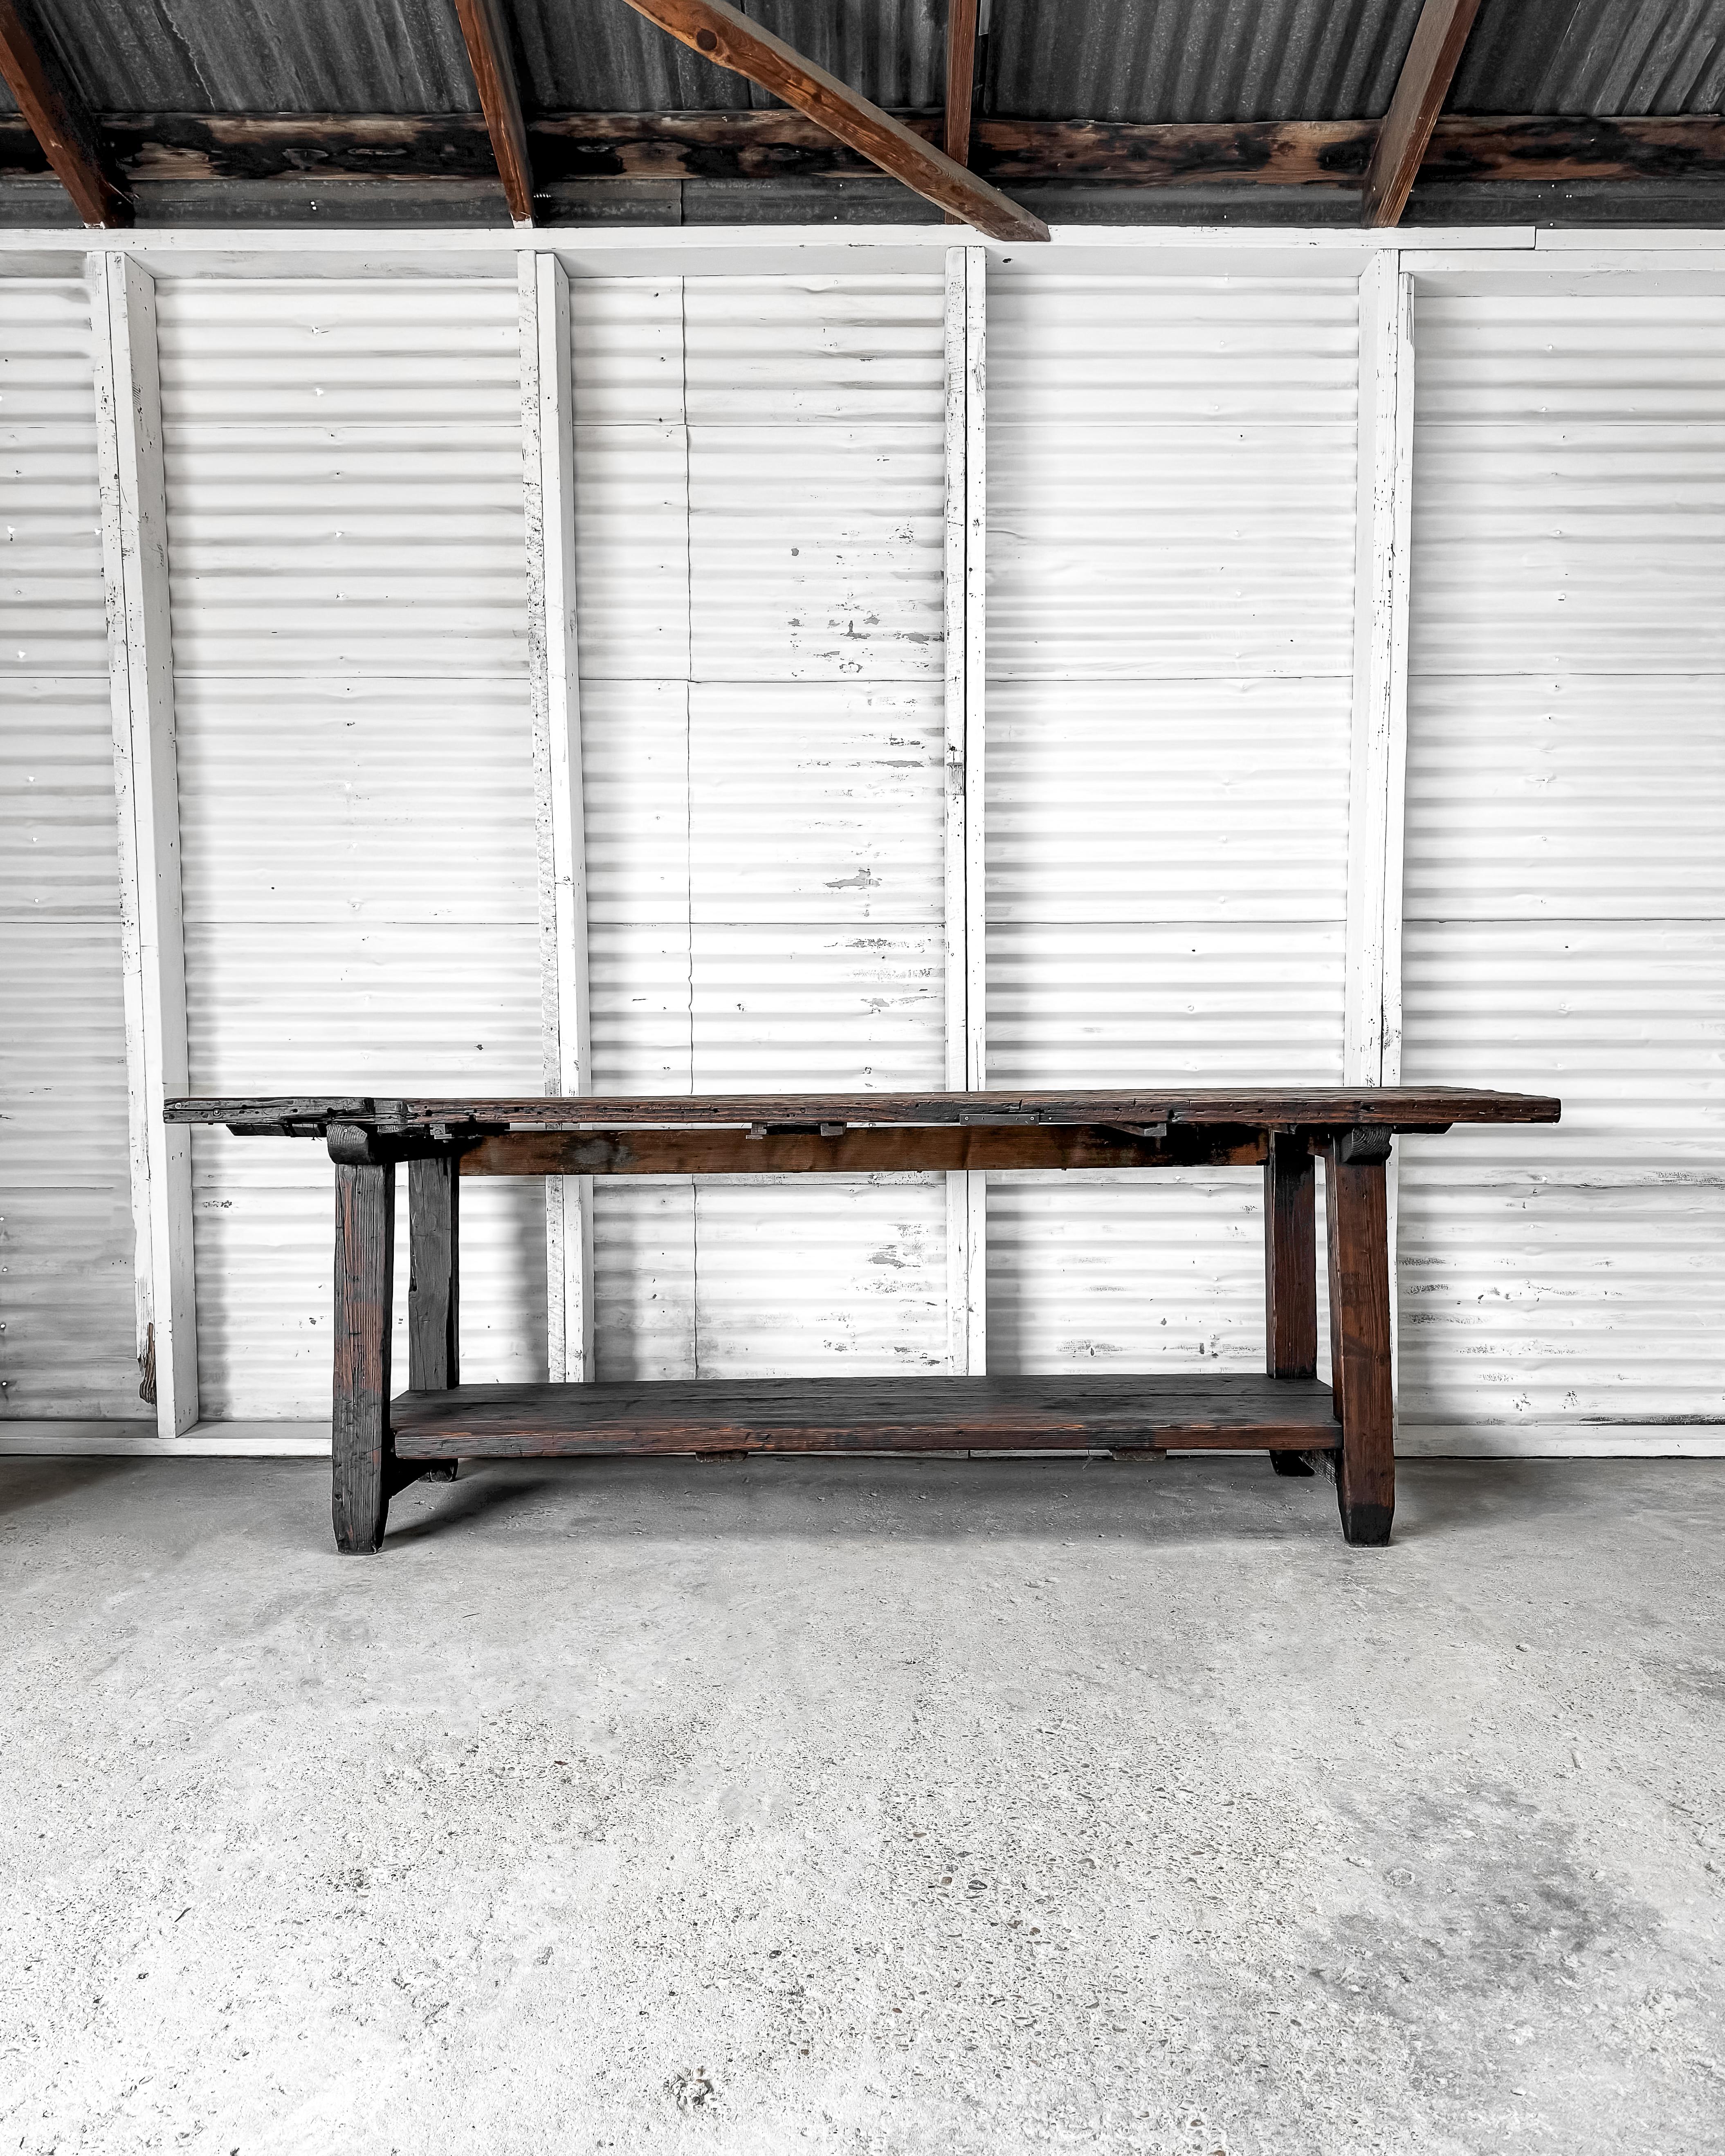 This rustic workbench, once utilized in a leather workshop in France, embodies strength and durability. Its substantial 3-board top sits atop squared legs, accompanied by a lower planked shelf that runs along the base. Bearing the marks of its rich